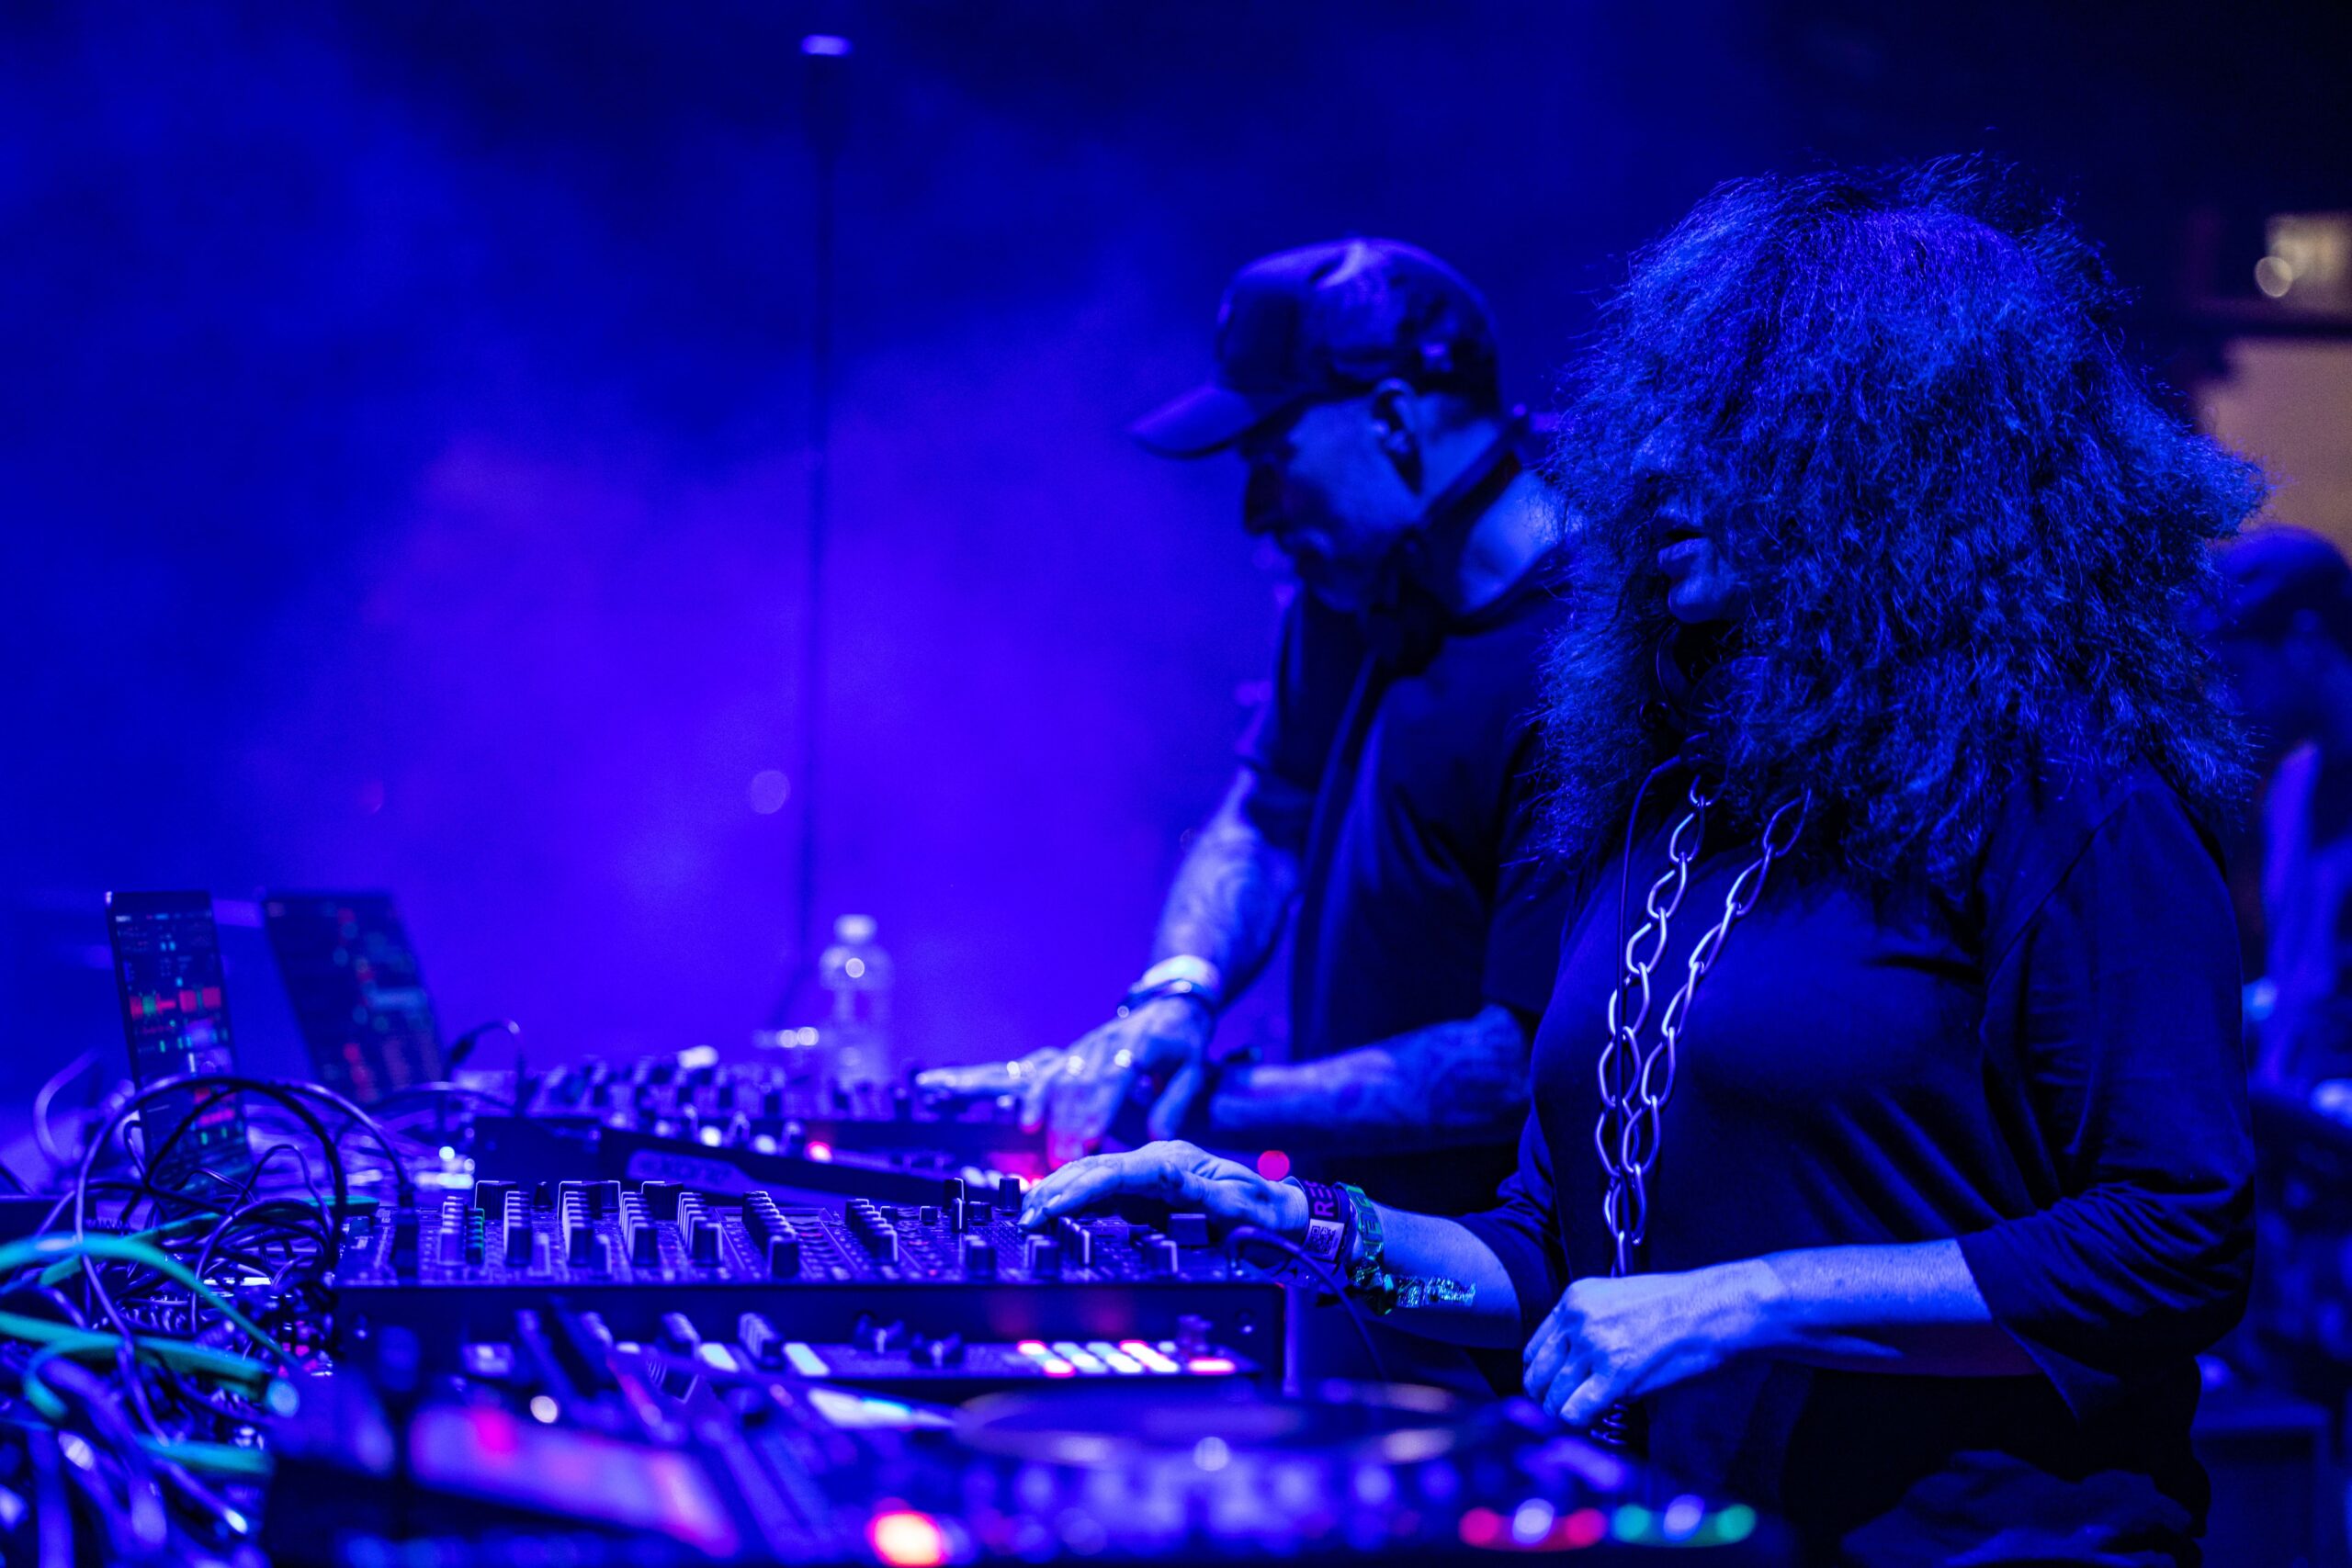 Nicole Moudaber back-to-back with Chris Liebing at Ultra Music Festival. Photo by RUDGRCOM